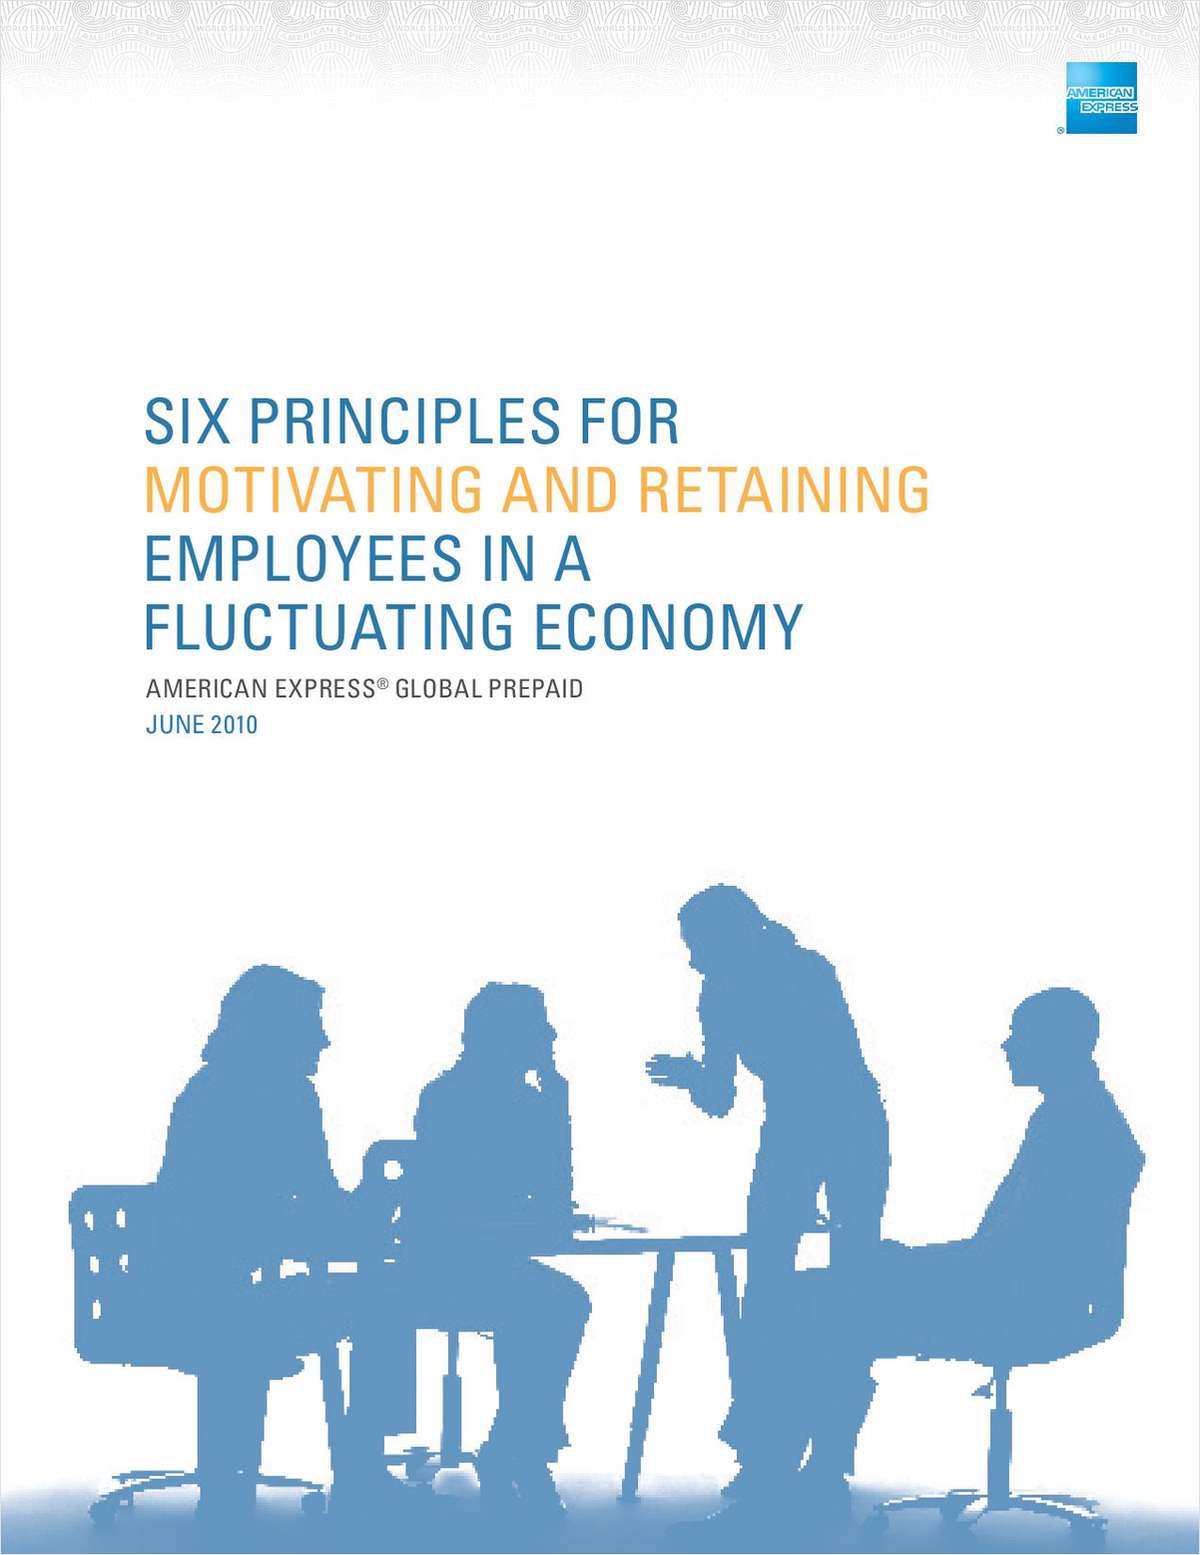 Six Principles for Motivating and Retaining Employees